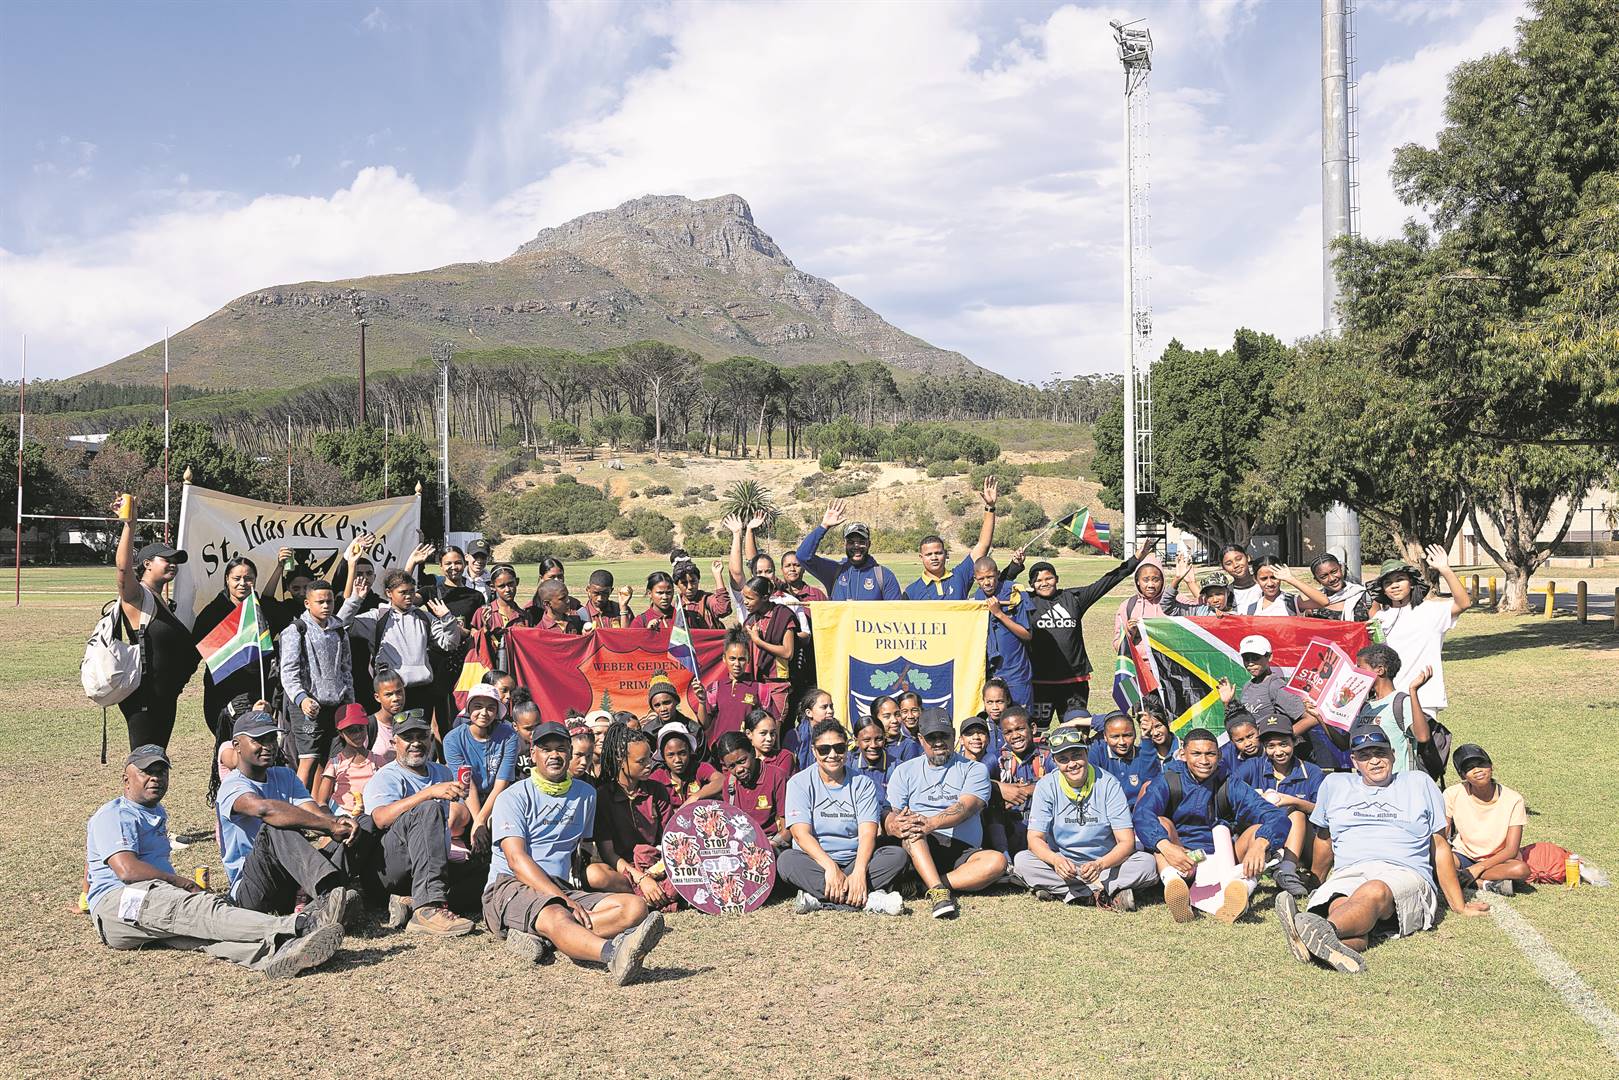 This group of 60 learners from four Stellenbosch schools joined Ubuntu Hiking on a hike to raise awareness on child trafficking. All four school principals are from the Jamestown area. Photos: Sonya Olivier